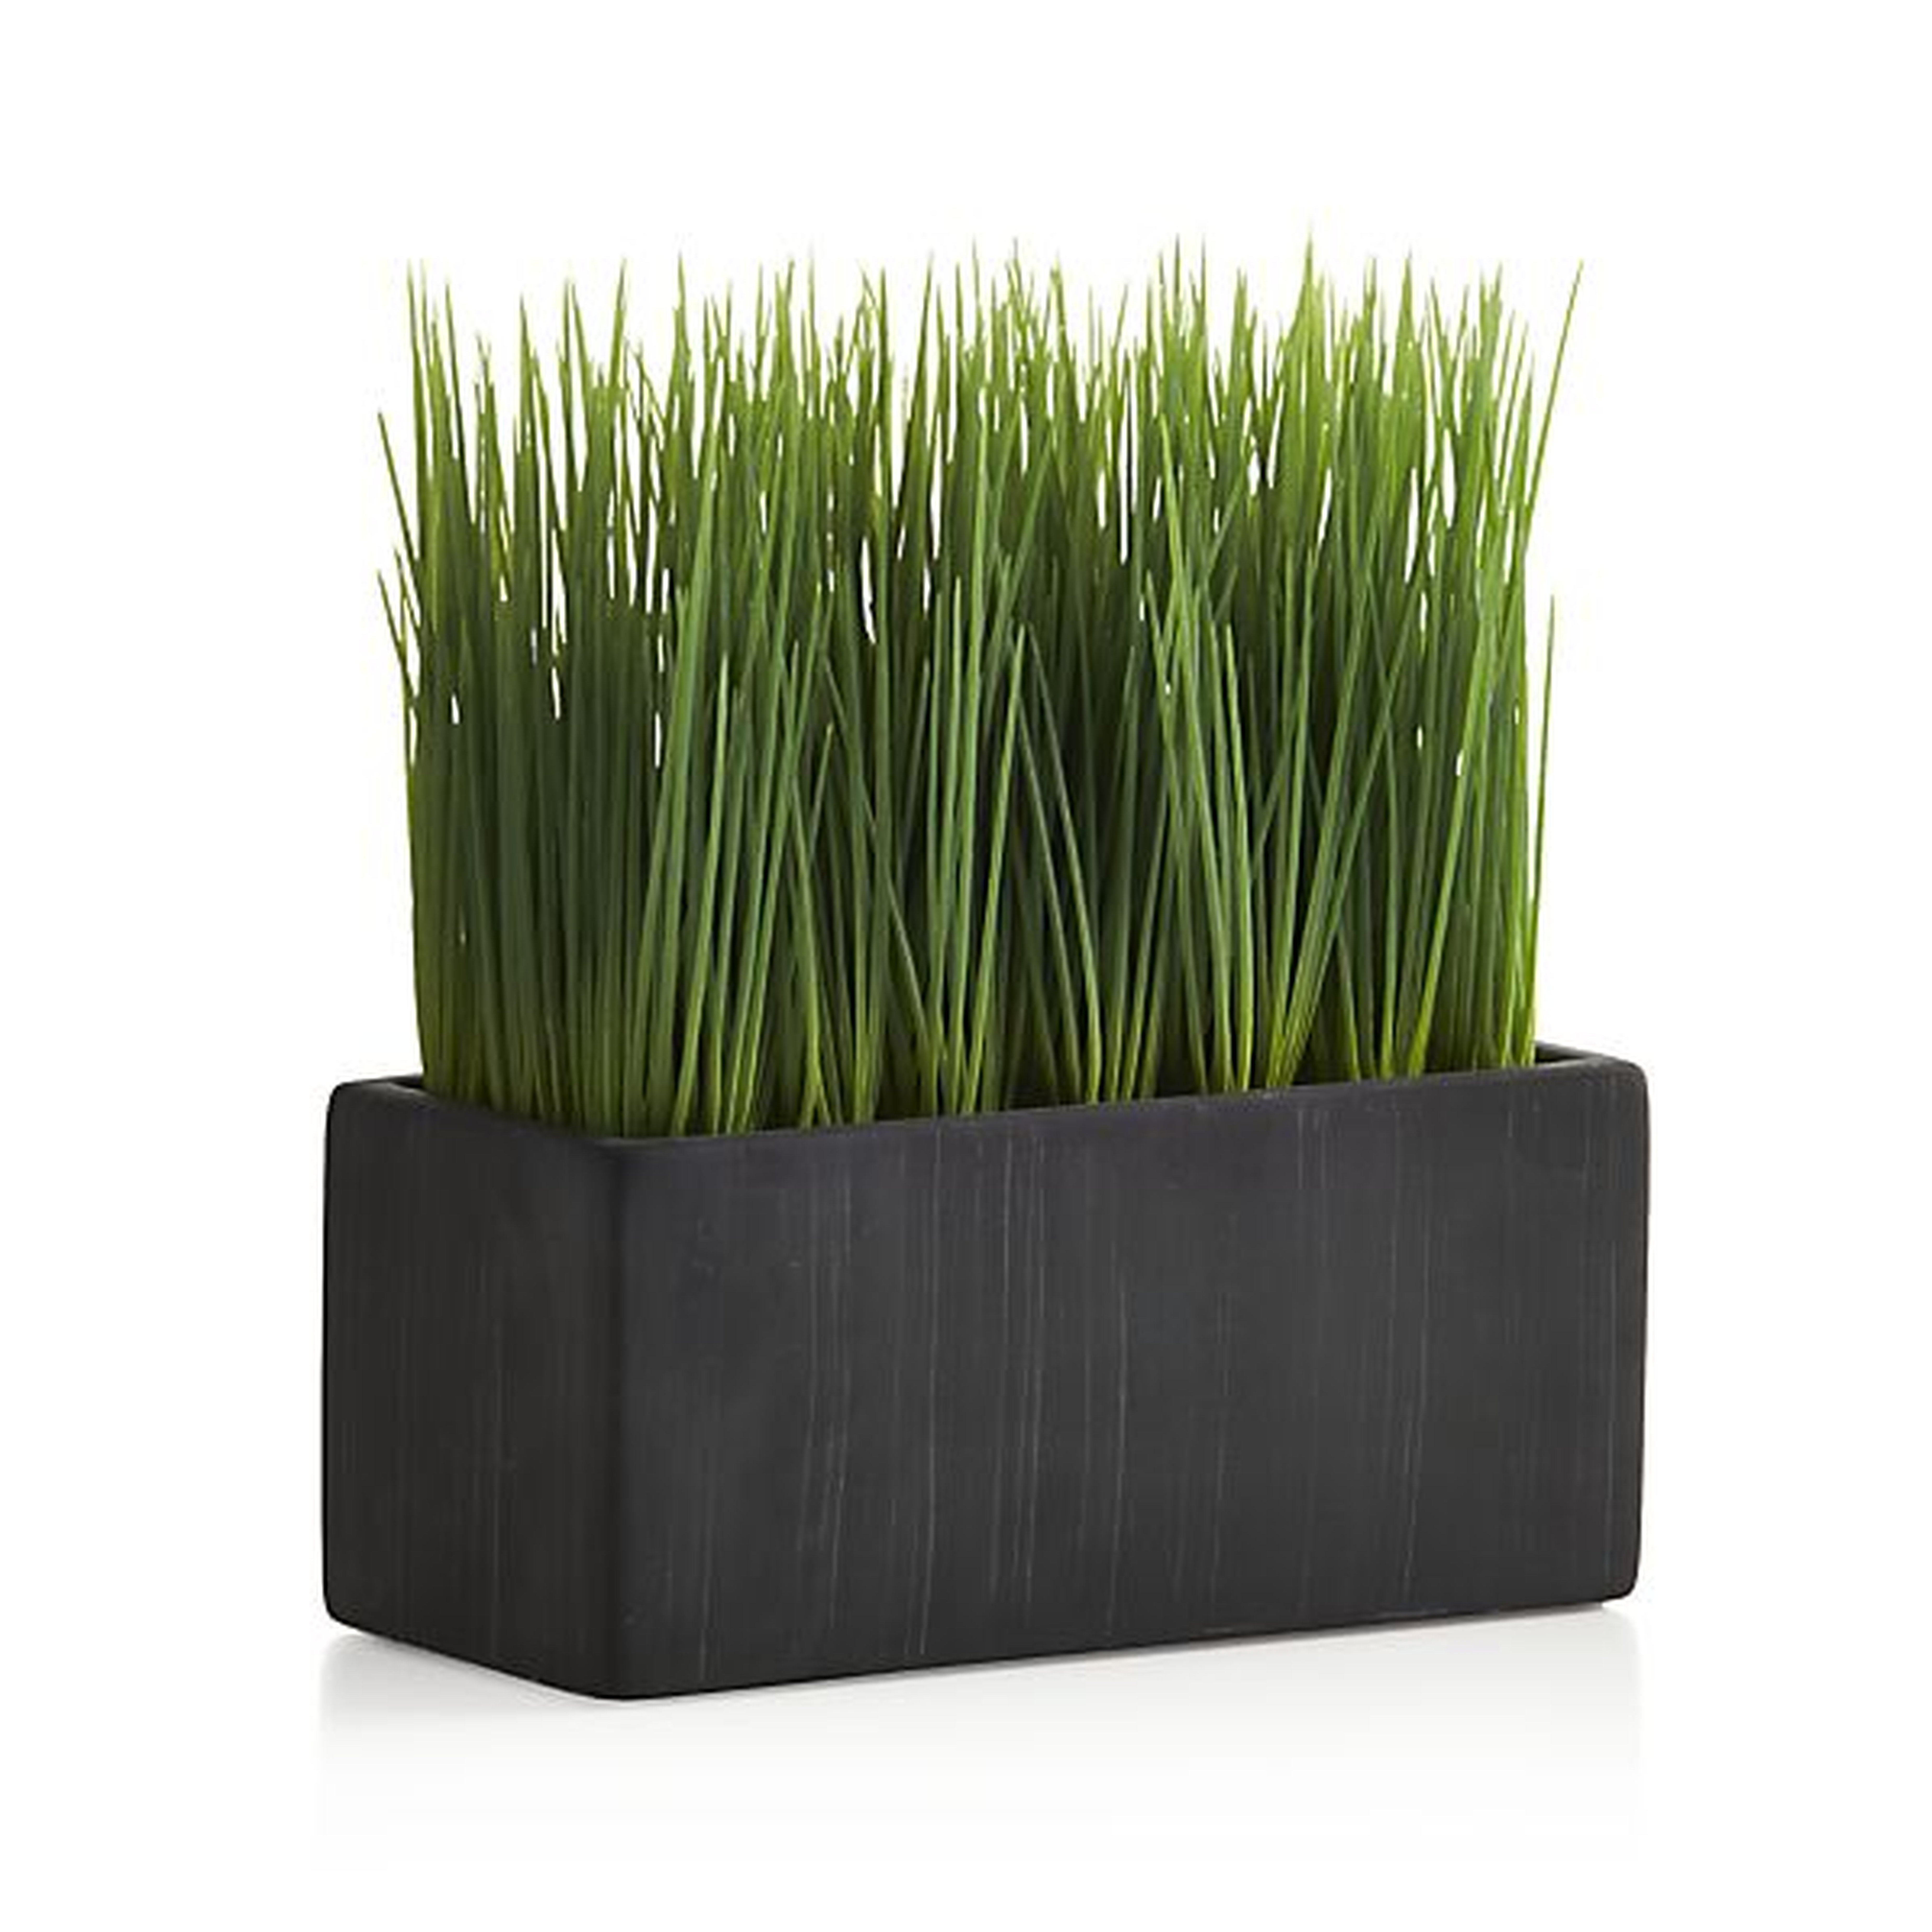 Large Potted Artificial Grass - Crate and Barrel